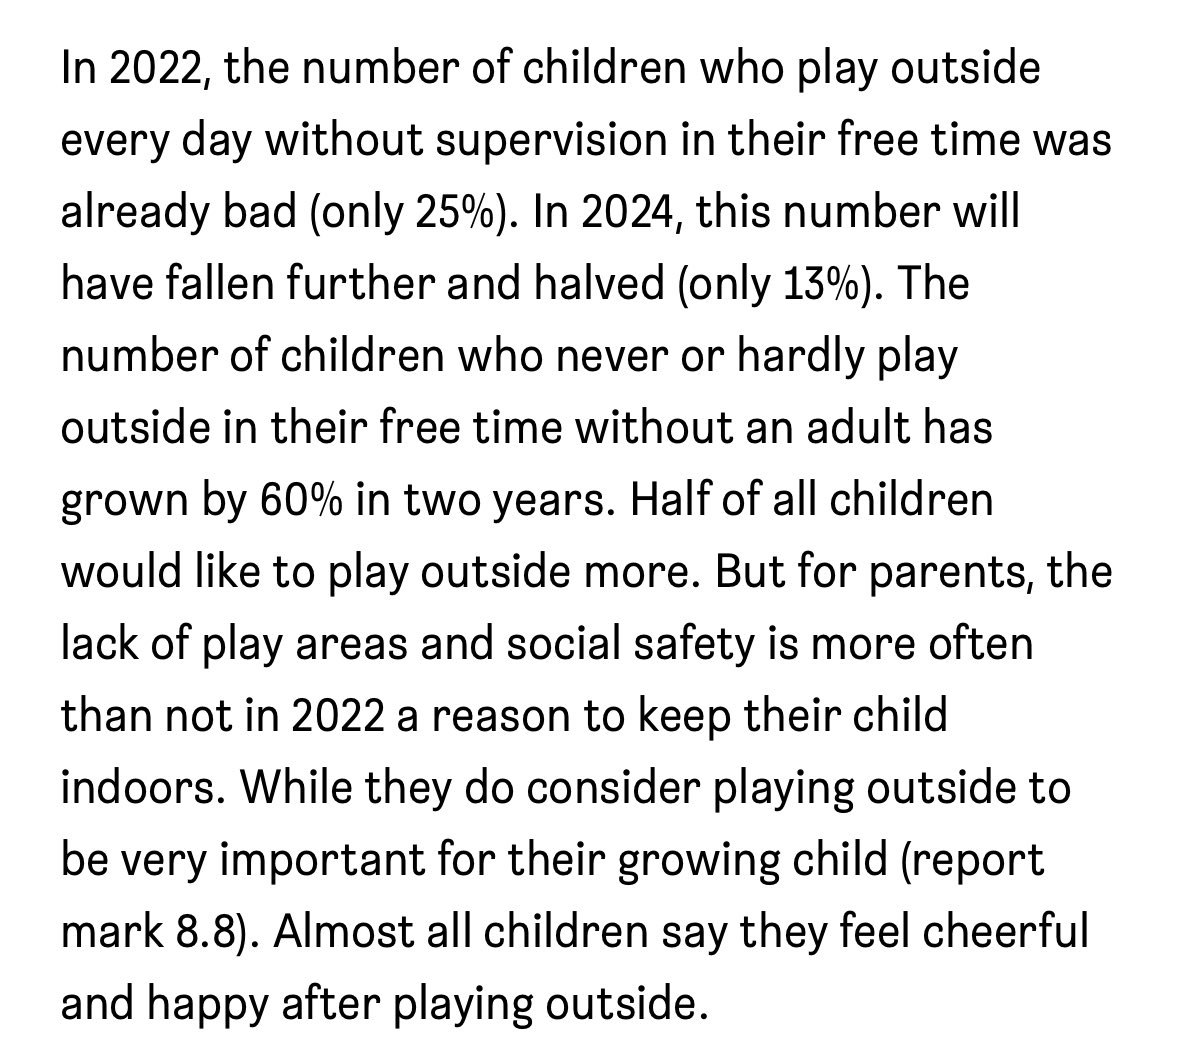 I’ve spent this week in the Netherlands thinking about children’s outdoor play - things here seem _so_ much more positive than at home in UK, but today @JantjeBeton_nl are sounding an alarm for the decline in outdoor play here too, as the %age who play out daily shrinks further.